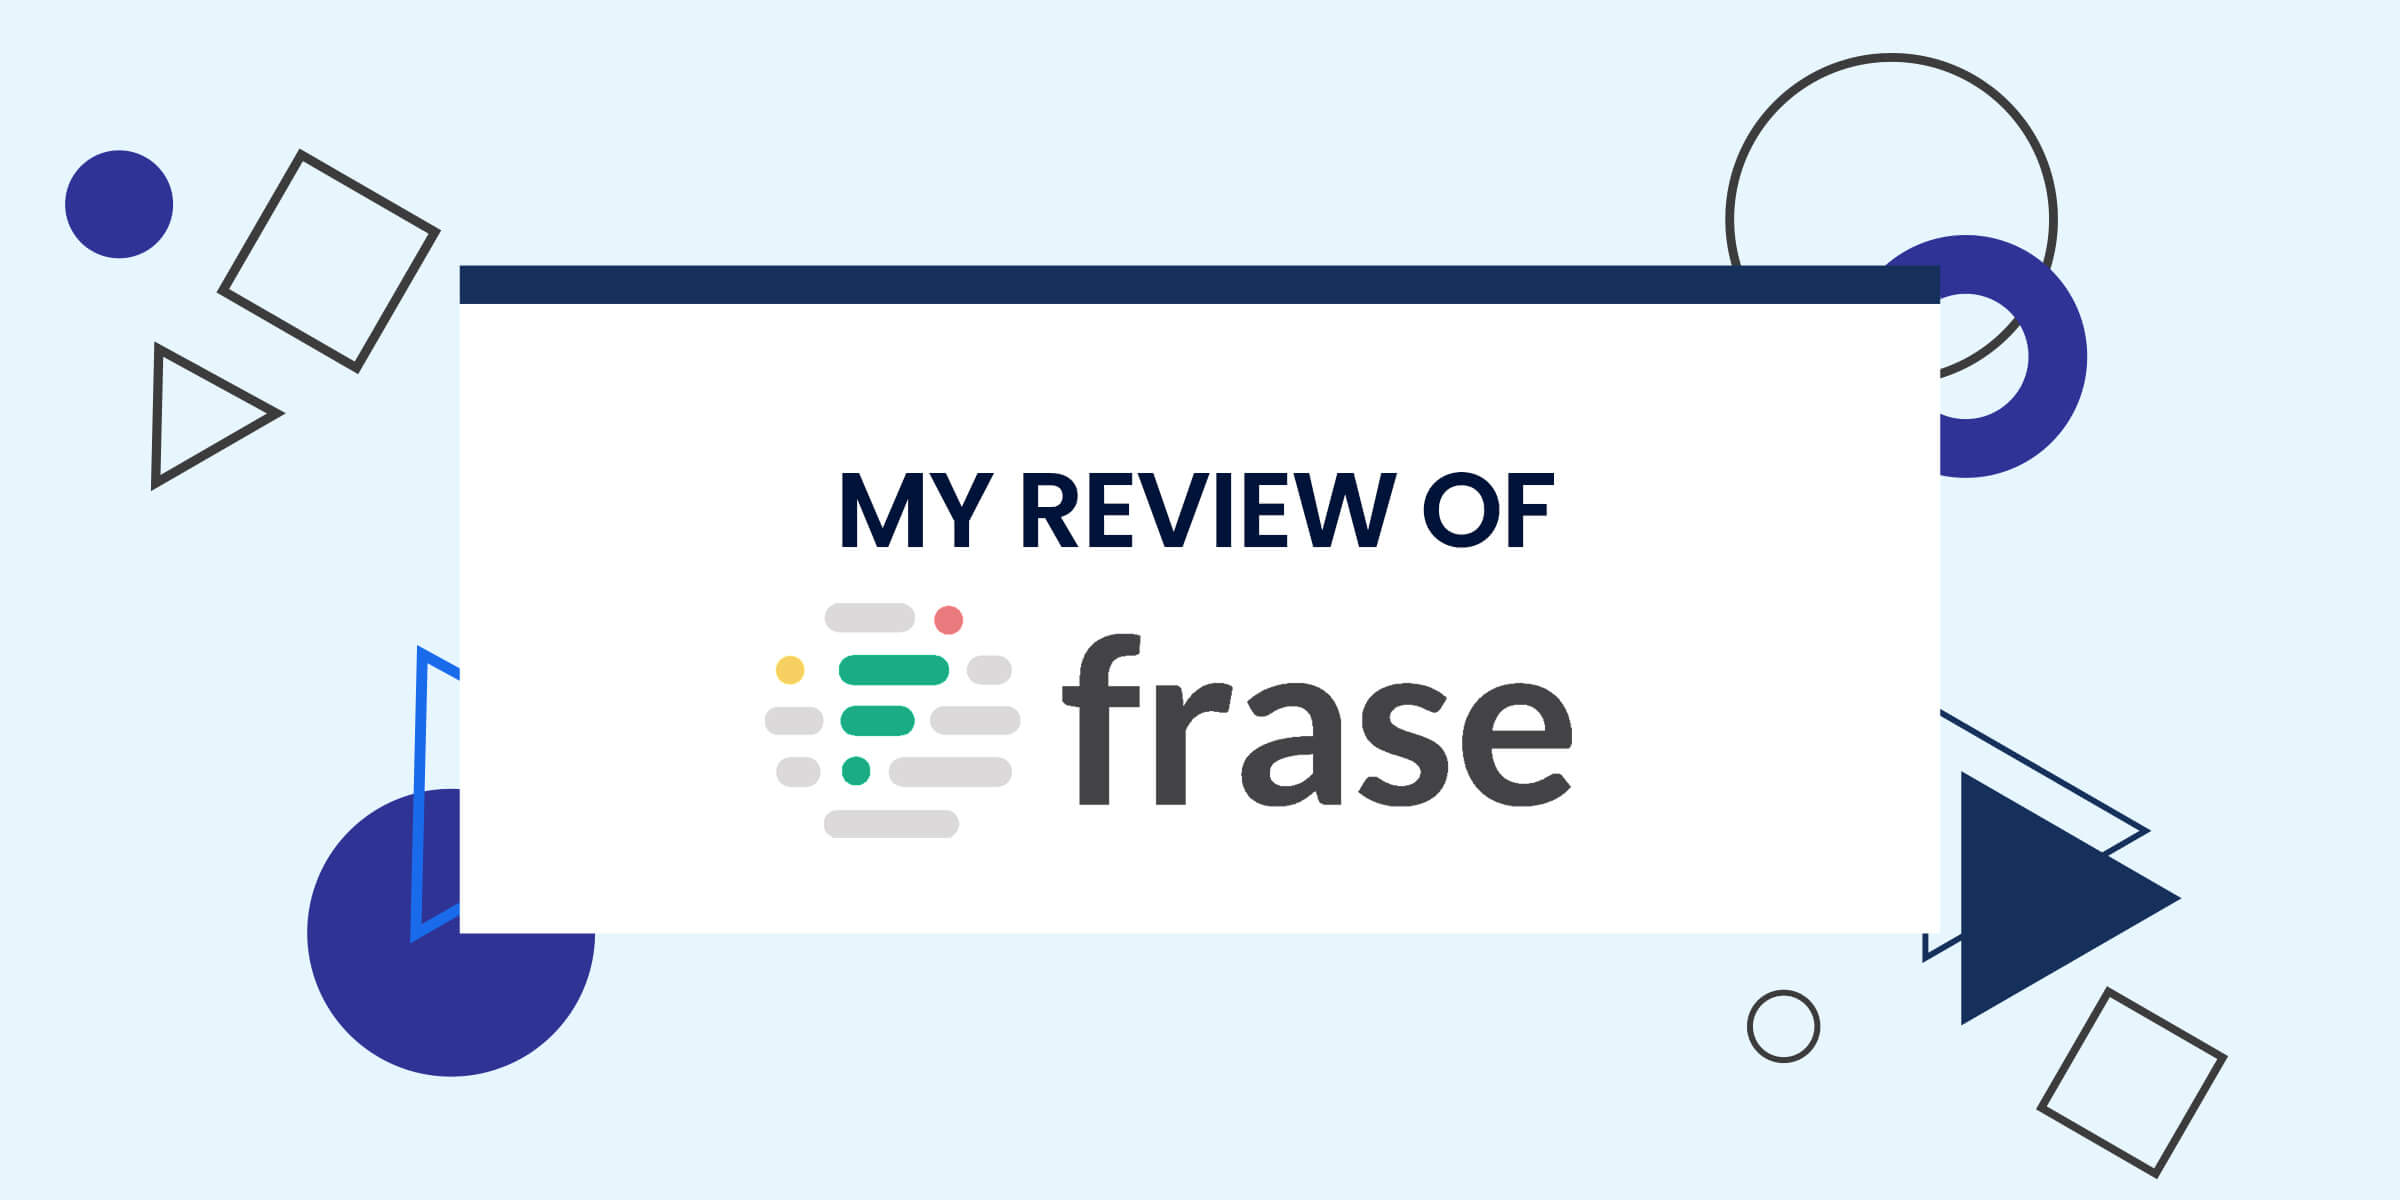 My Review of Frase